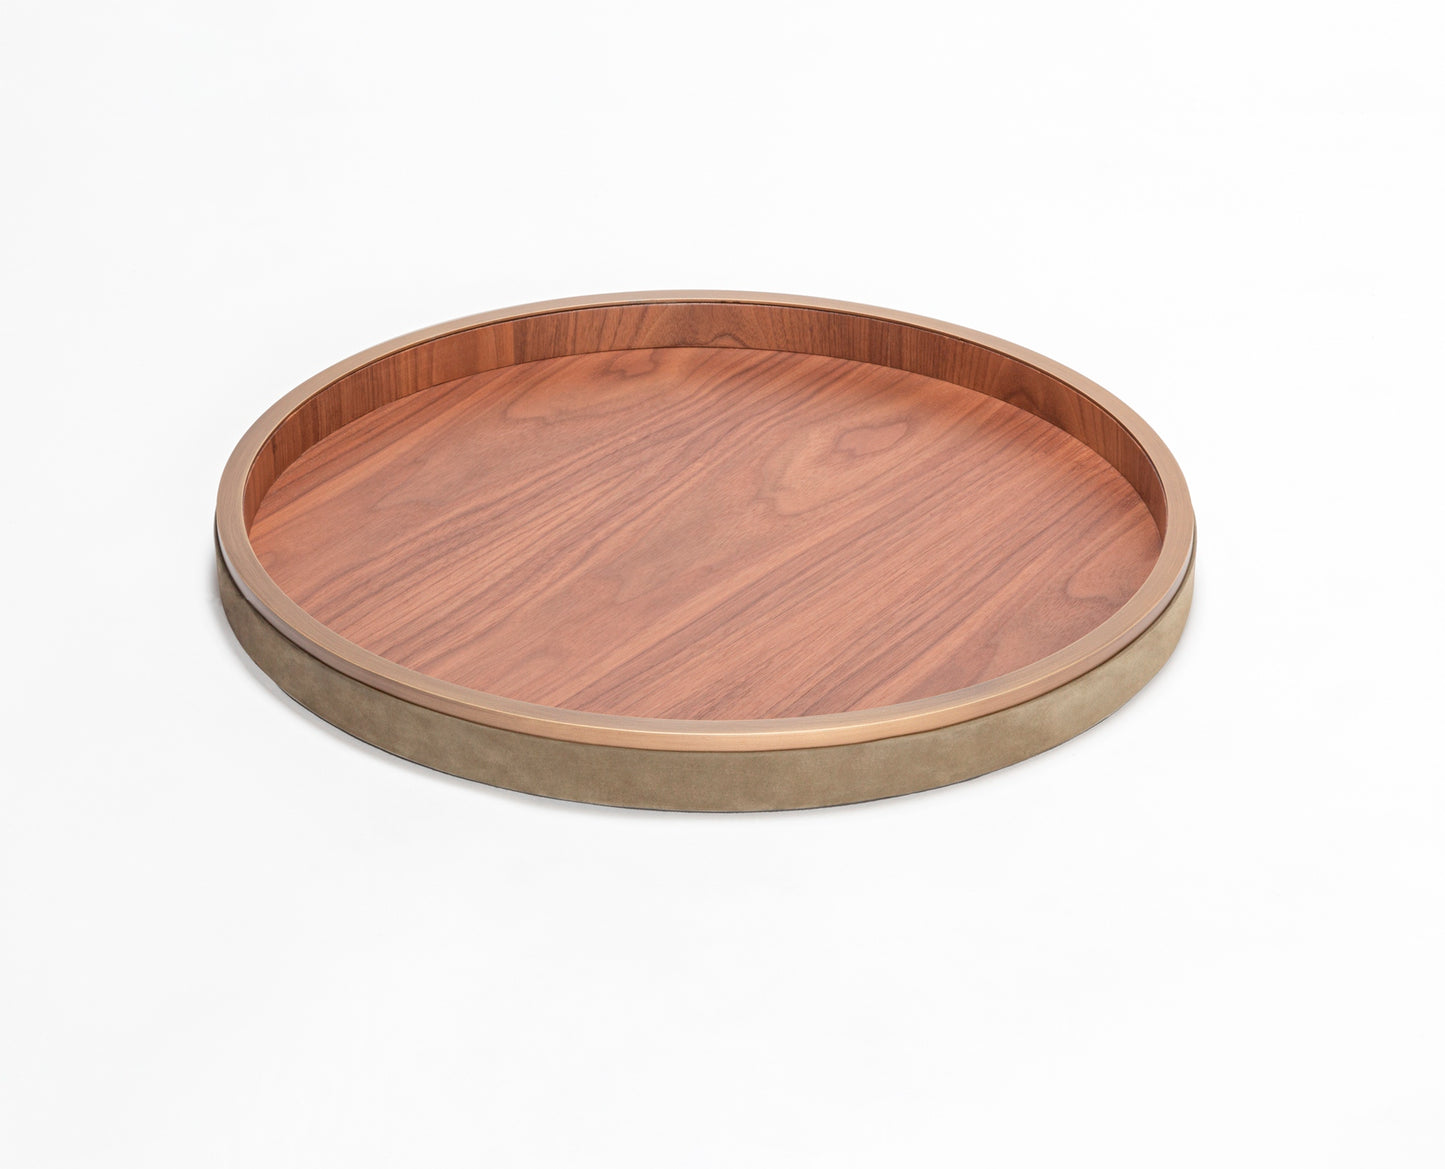 Riviere Dama Leather & Wood Round Tray | Partially Leather-Covered Wood Structure | Elegant and Functional Design | Perfect for Serving or Displaying Items | Explore Luxury Accessories at 2Jour Concierge, #1 luxury high-end gift & lifestyle shop